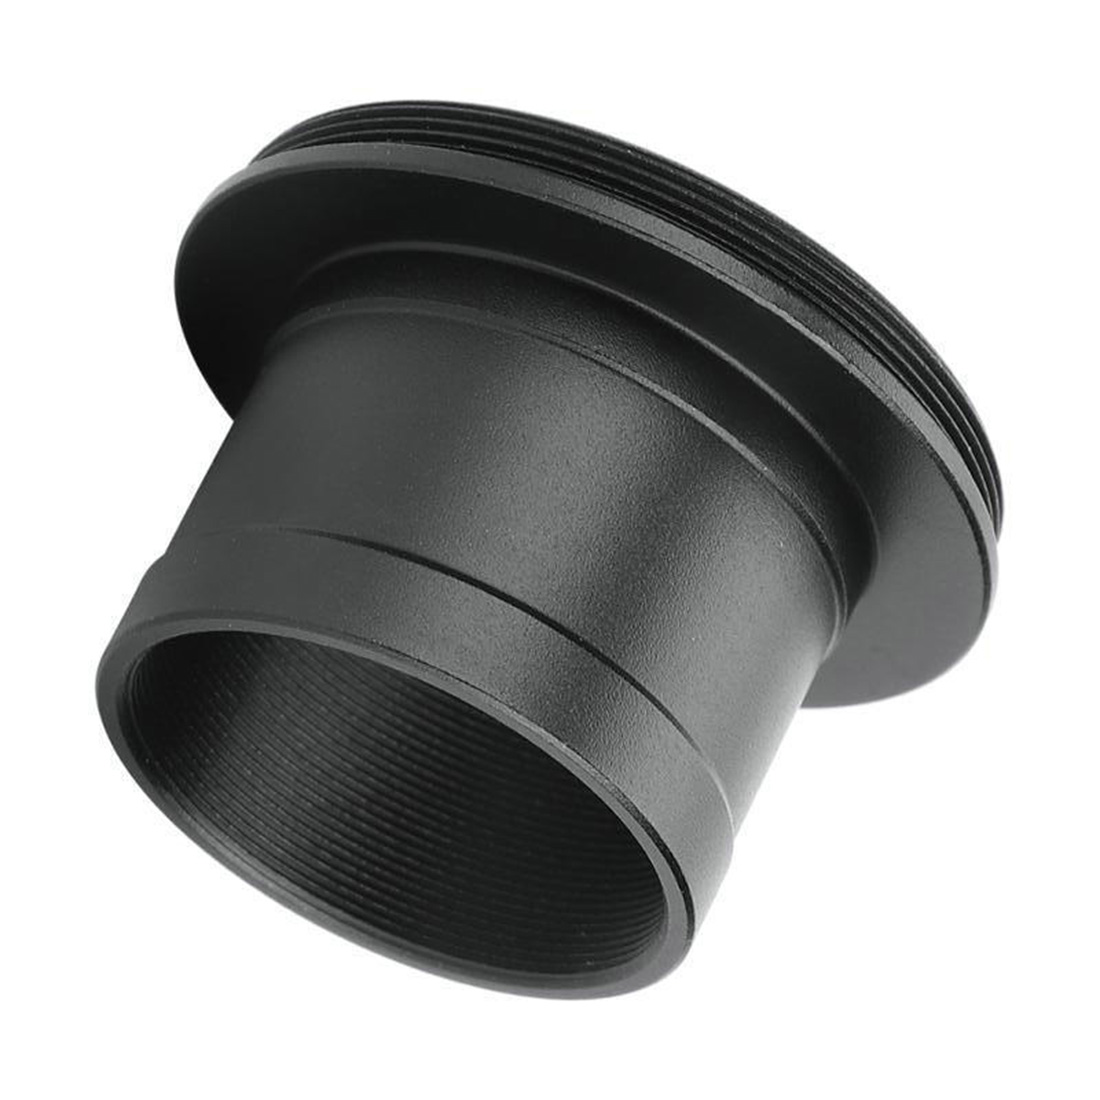 1.25 inch Filter Adapter Ring M30*1mm to M28*0.6 Thread Telescope